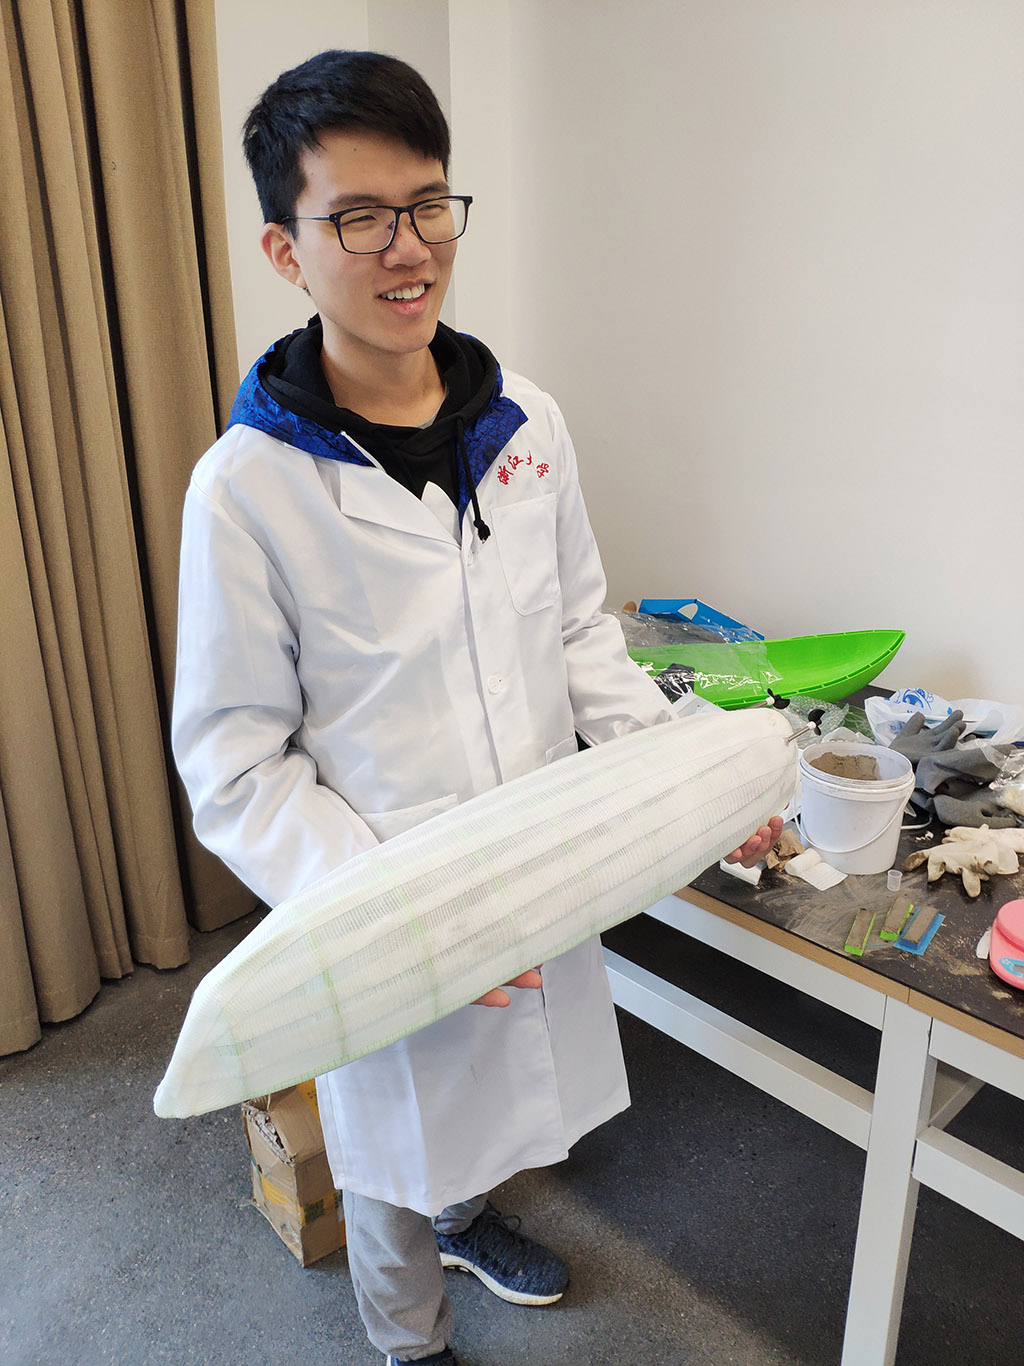 20190317 Modal Boat Covered by FRP with Kaihang Zhang